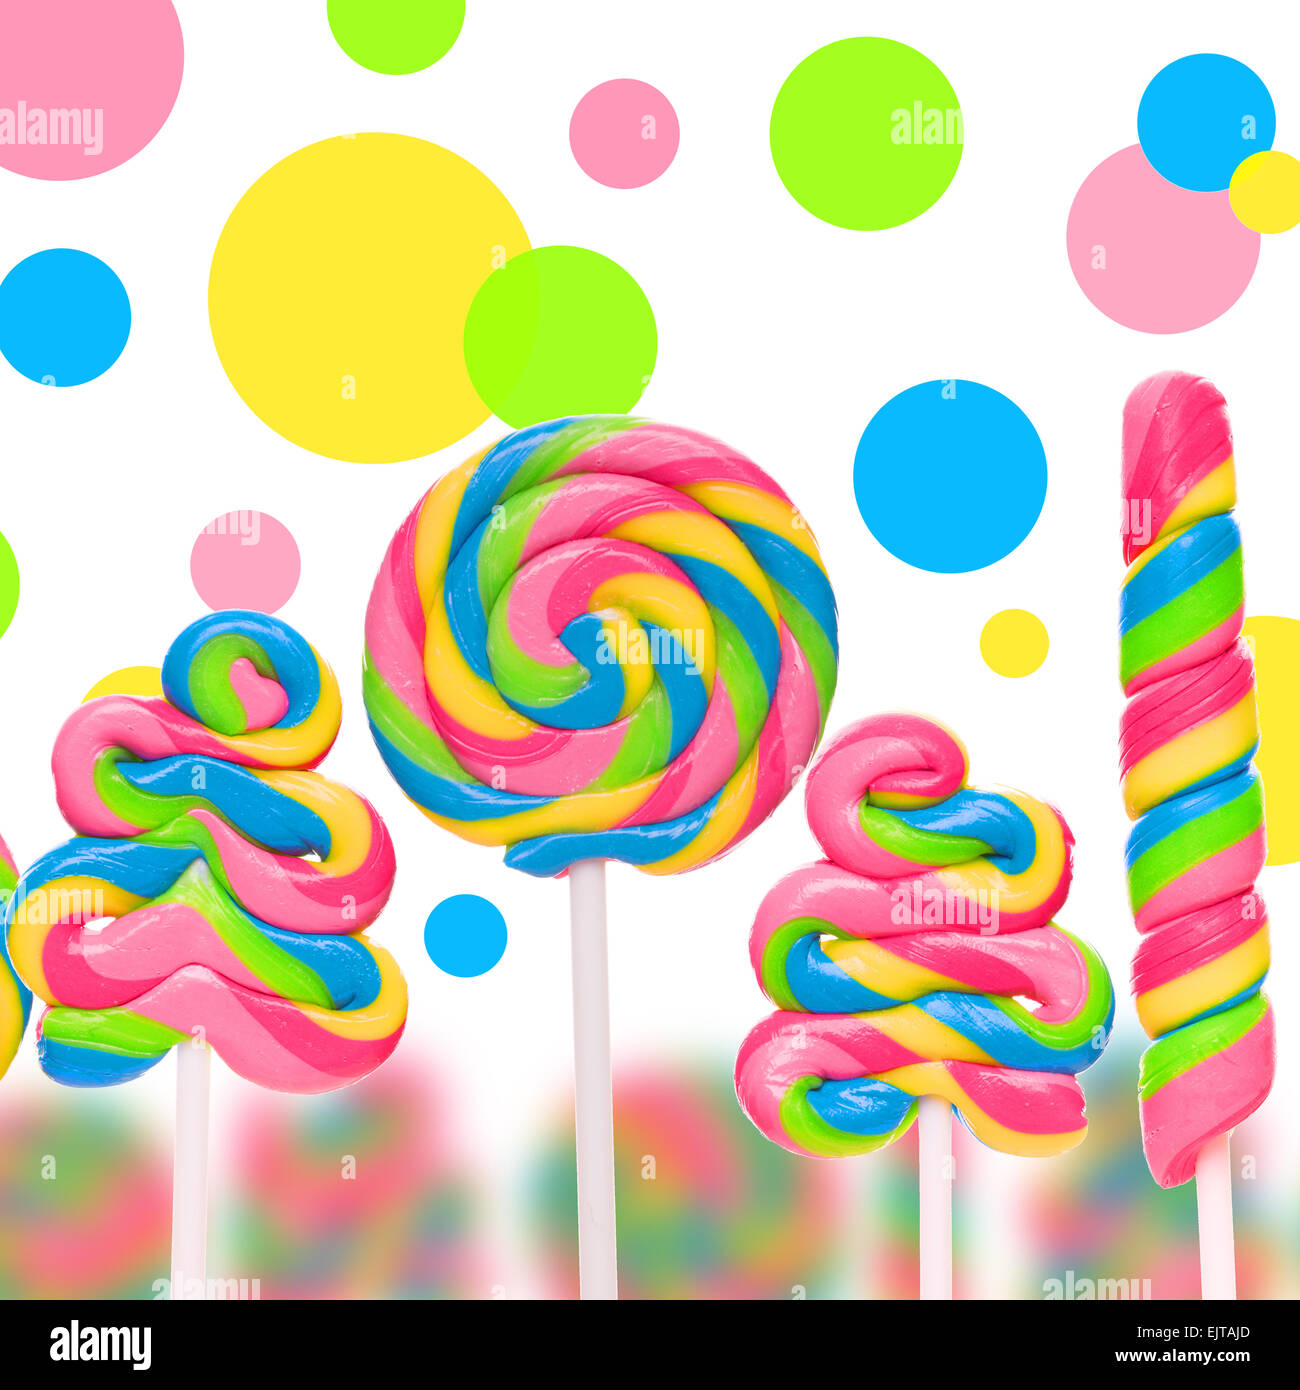 Fantasy sweet candy land with lollies Stock Photo